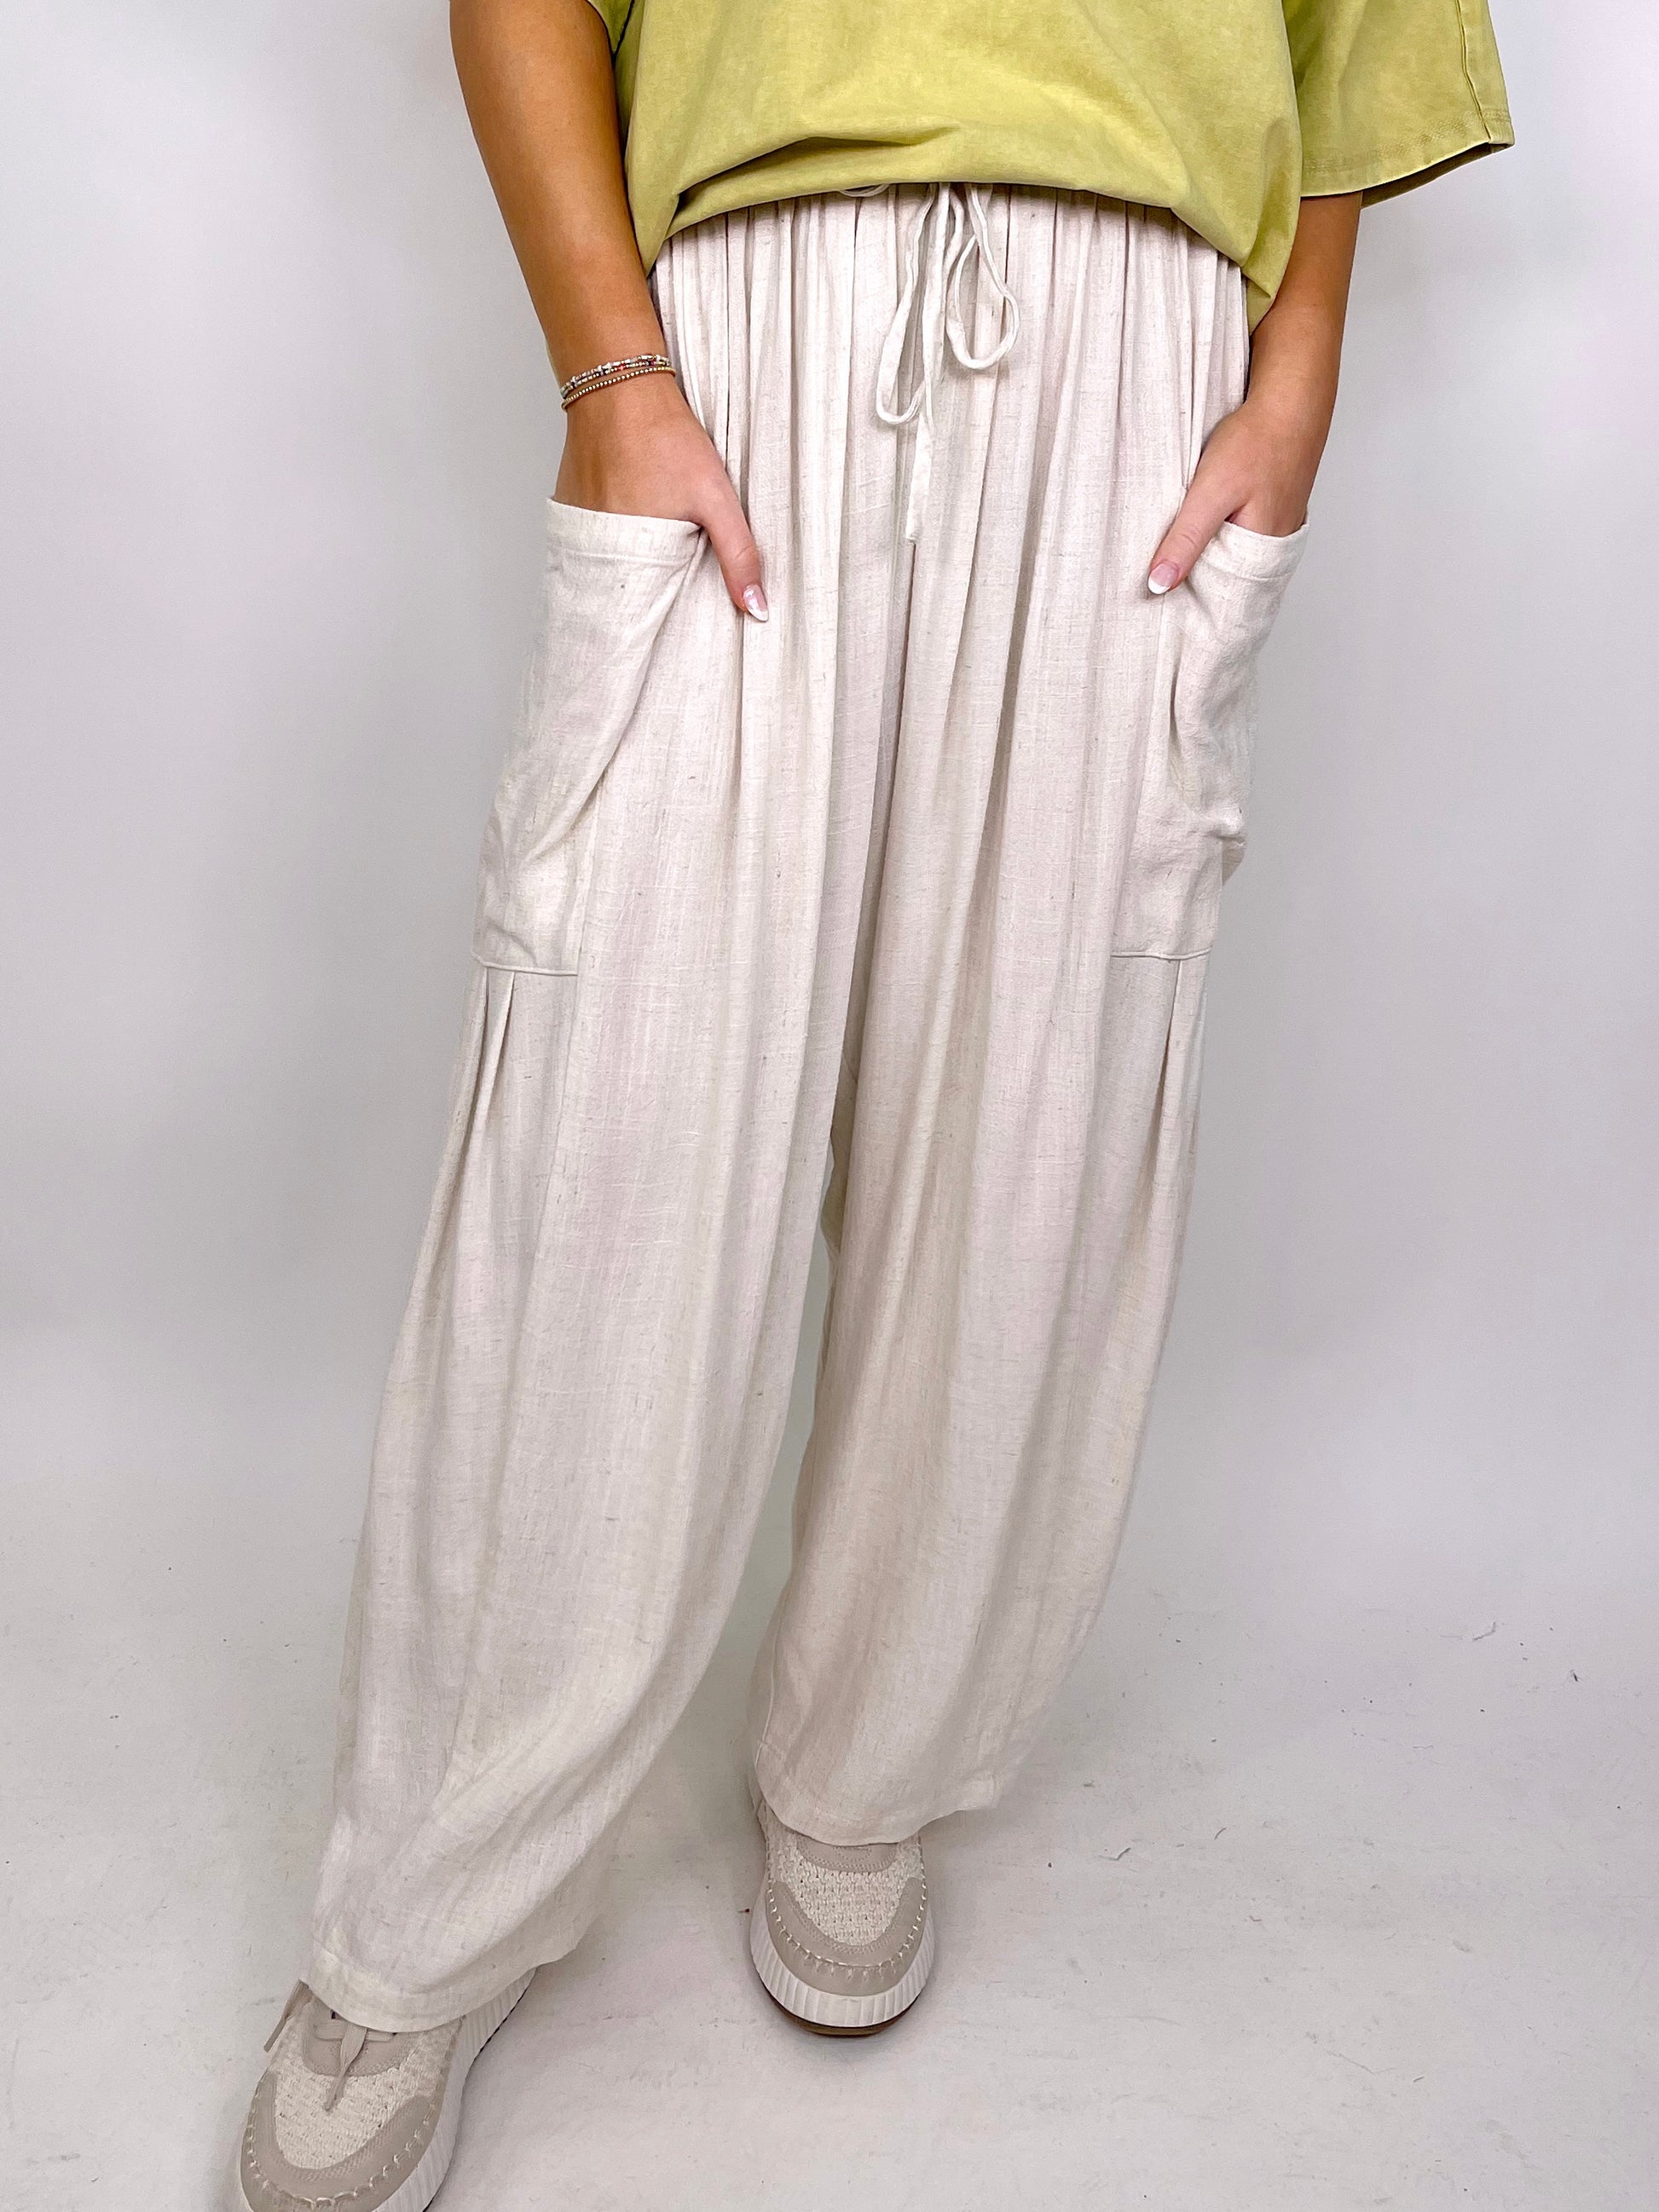 The Laney Pants-Lounge Pants-Jodifl-The Village Shoppe, Women’s Fashion Boutique, Shop Online and In Store - Located in Muscle Shoals, AL.